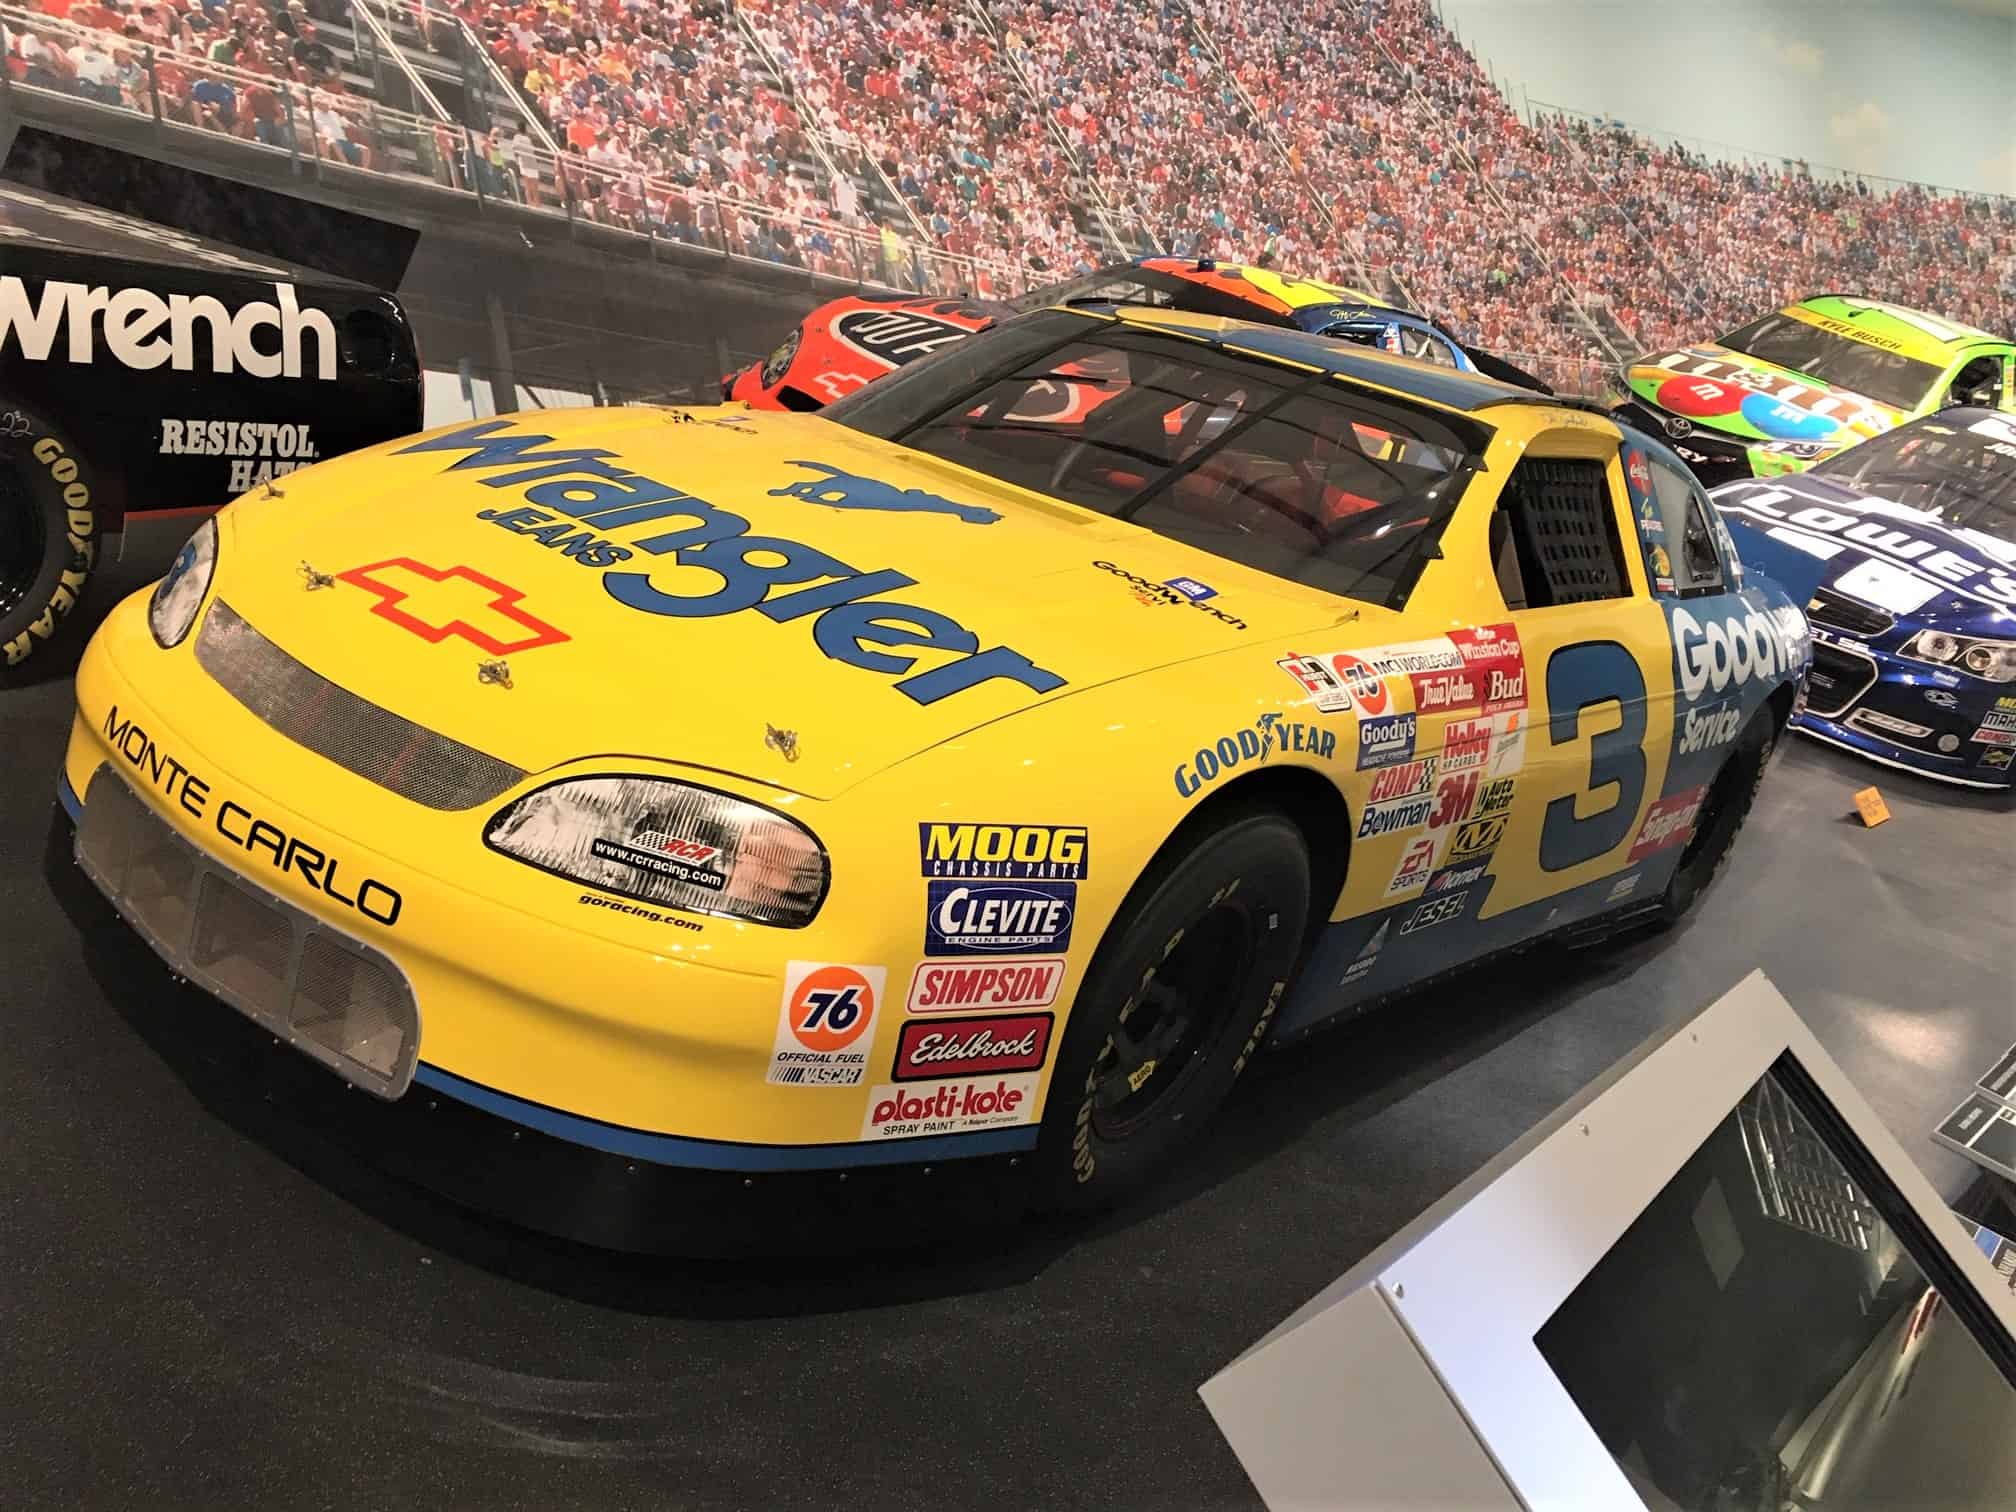 Car museums, Dale Earnhardt Jr. curates ‘Glory Road’ exhibit at NASCAR Hall of Fame, ClassicCars.com Journal